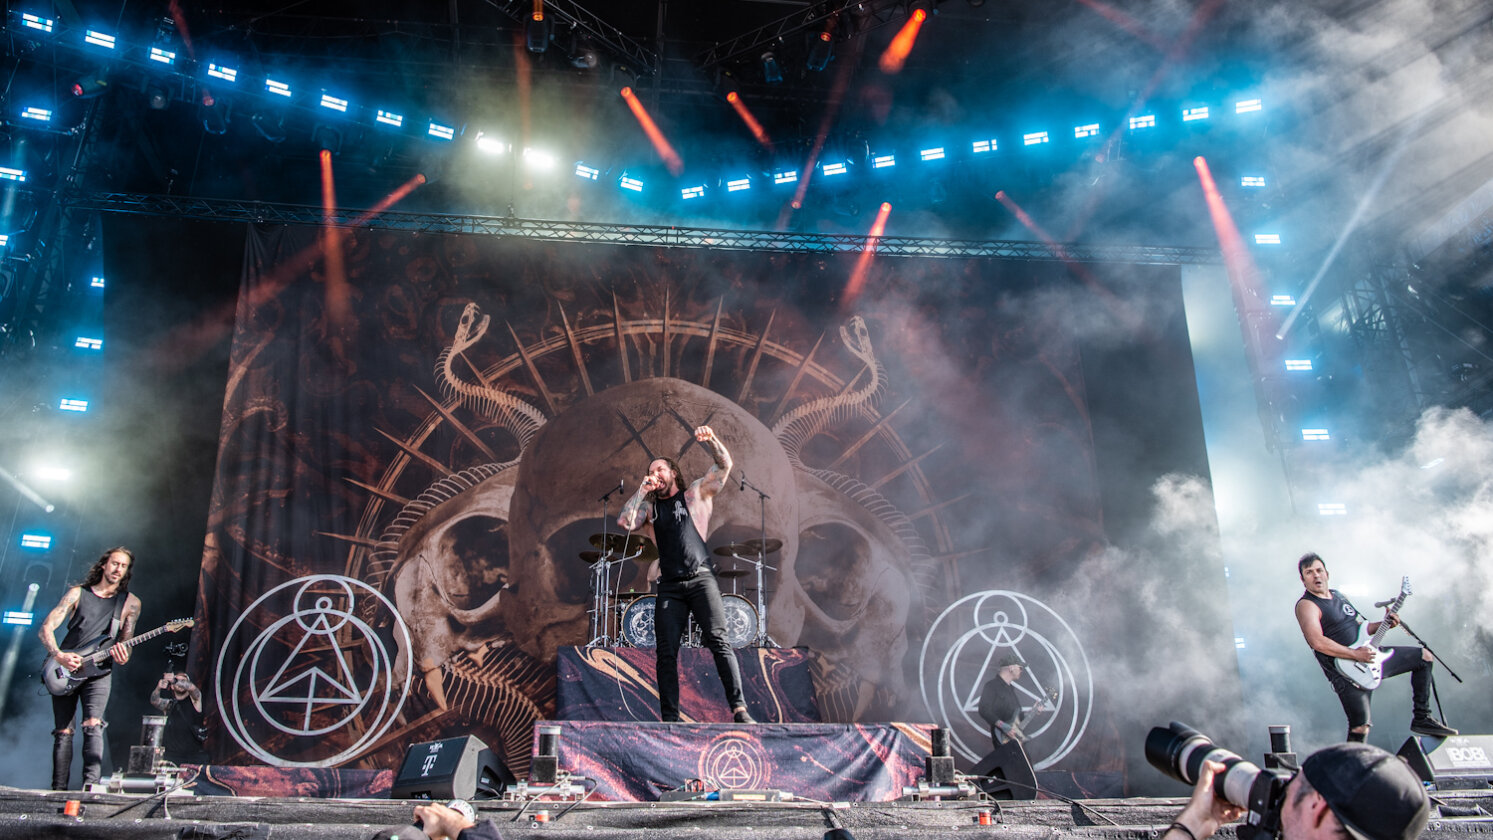 Keine Gnade auch am Wochenende: Slipknot, In Extremo, Clutch, Lacuna Coil, Behemoth live. – As I lay dying